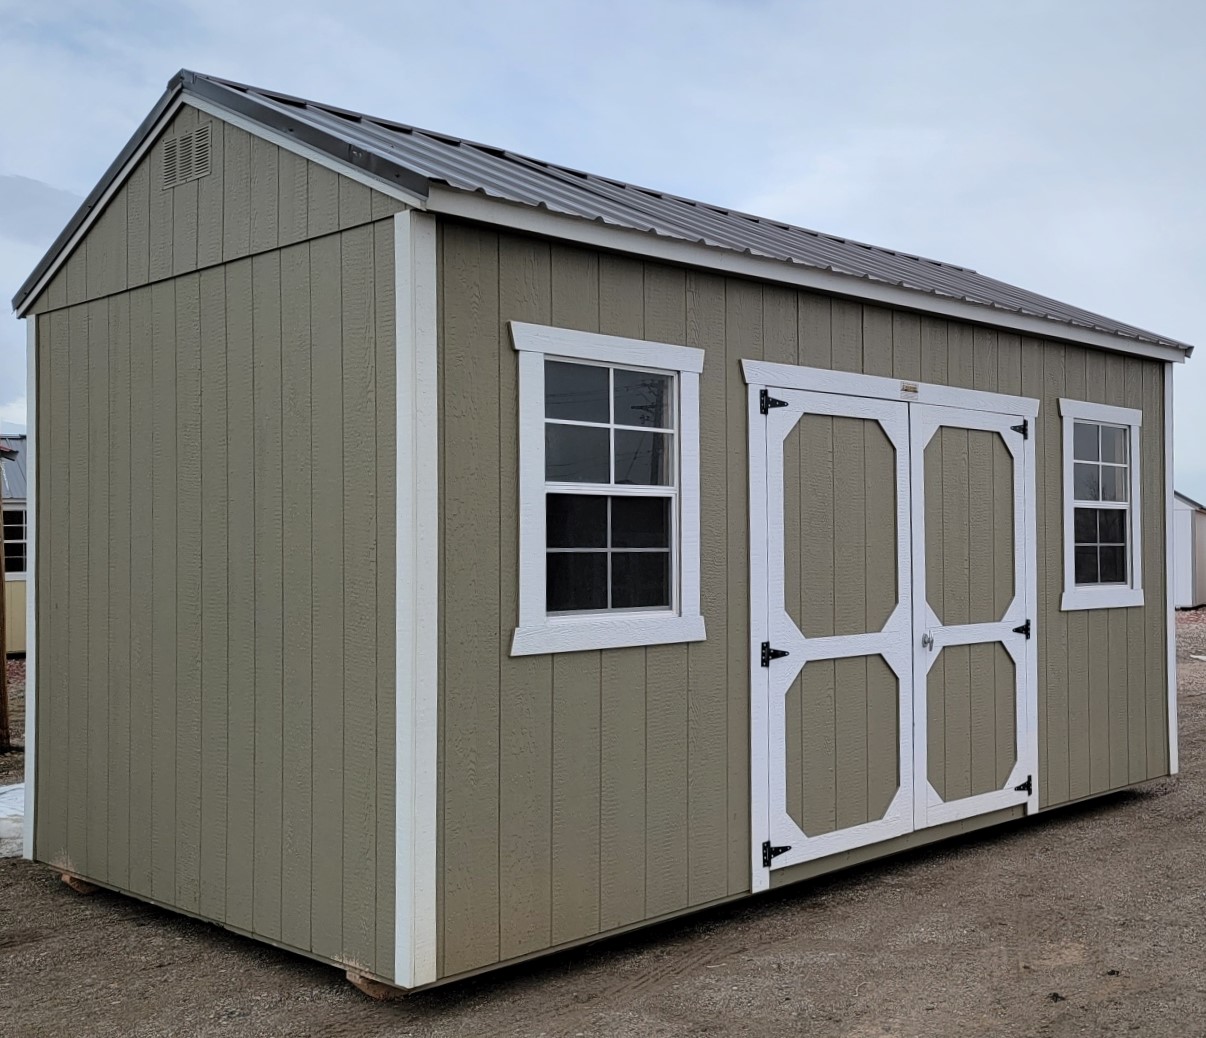 Buy Now: 10x16 Painted Utility Shed For Sale | Painted Clay or Order at French Creek Designs Shed Sales, Casper, WY